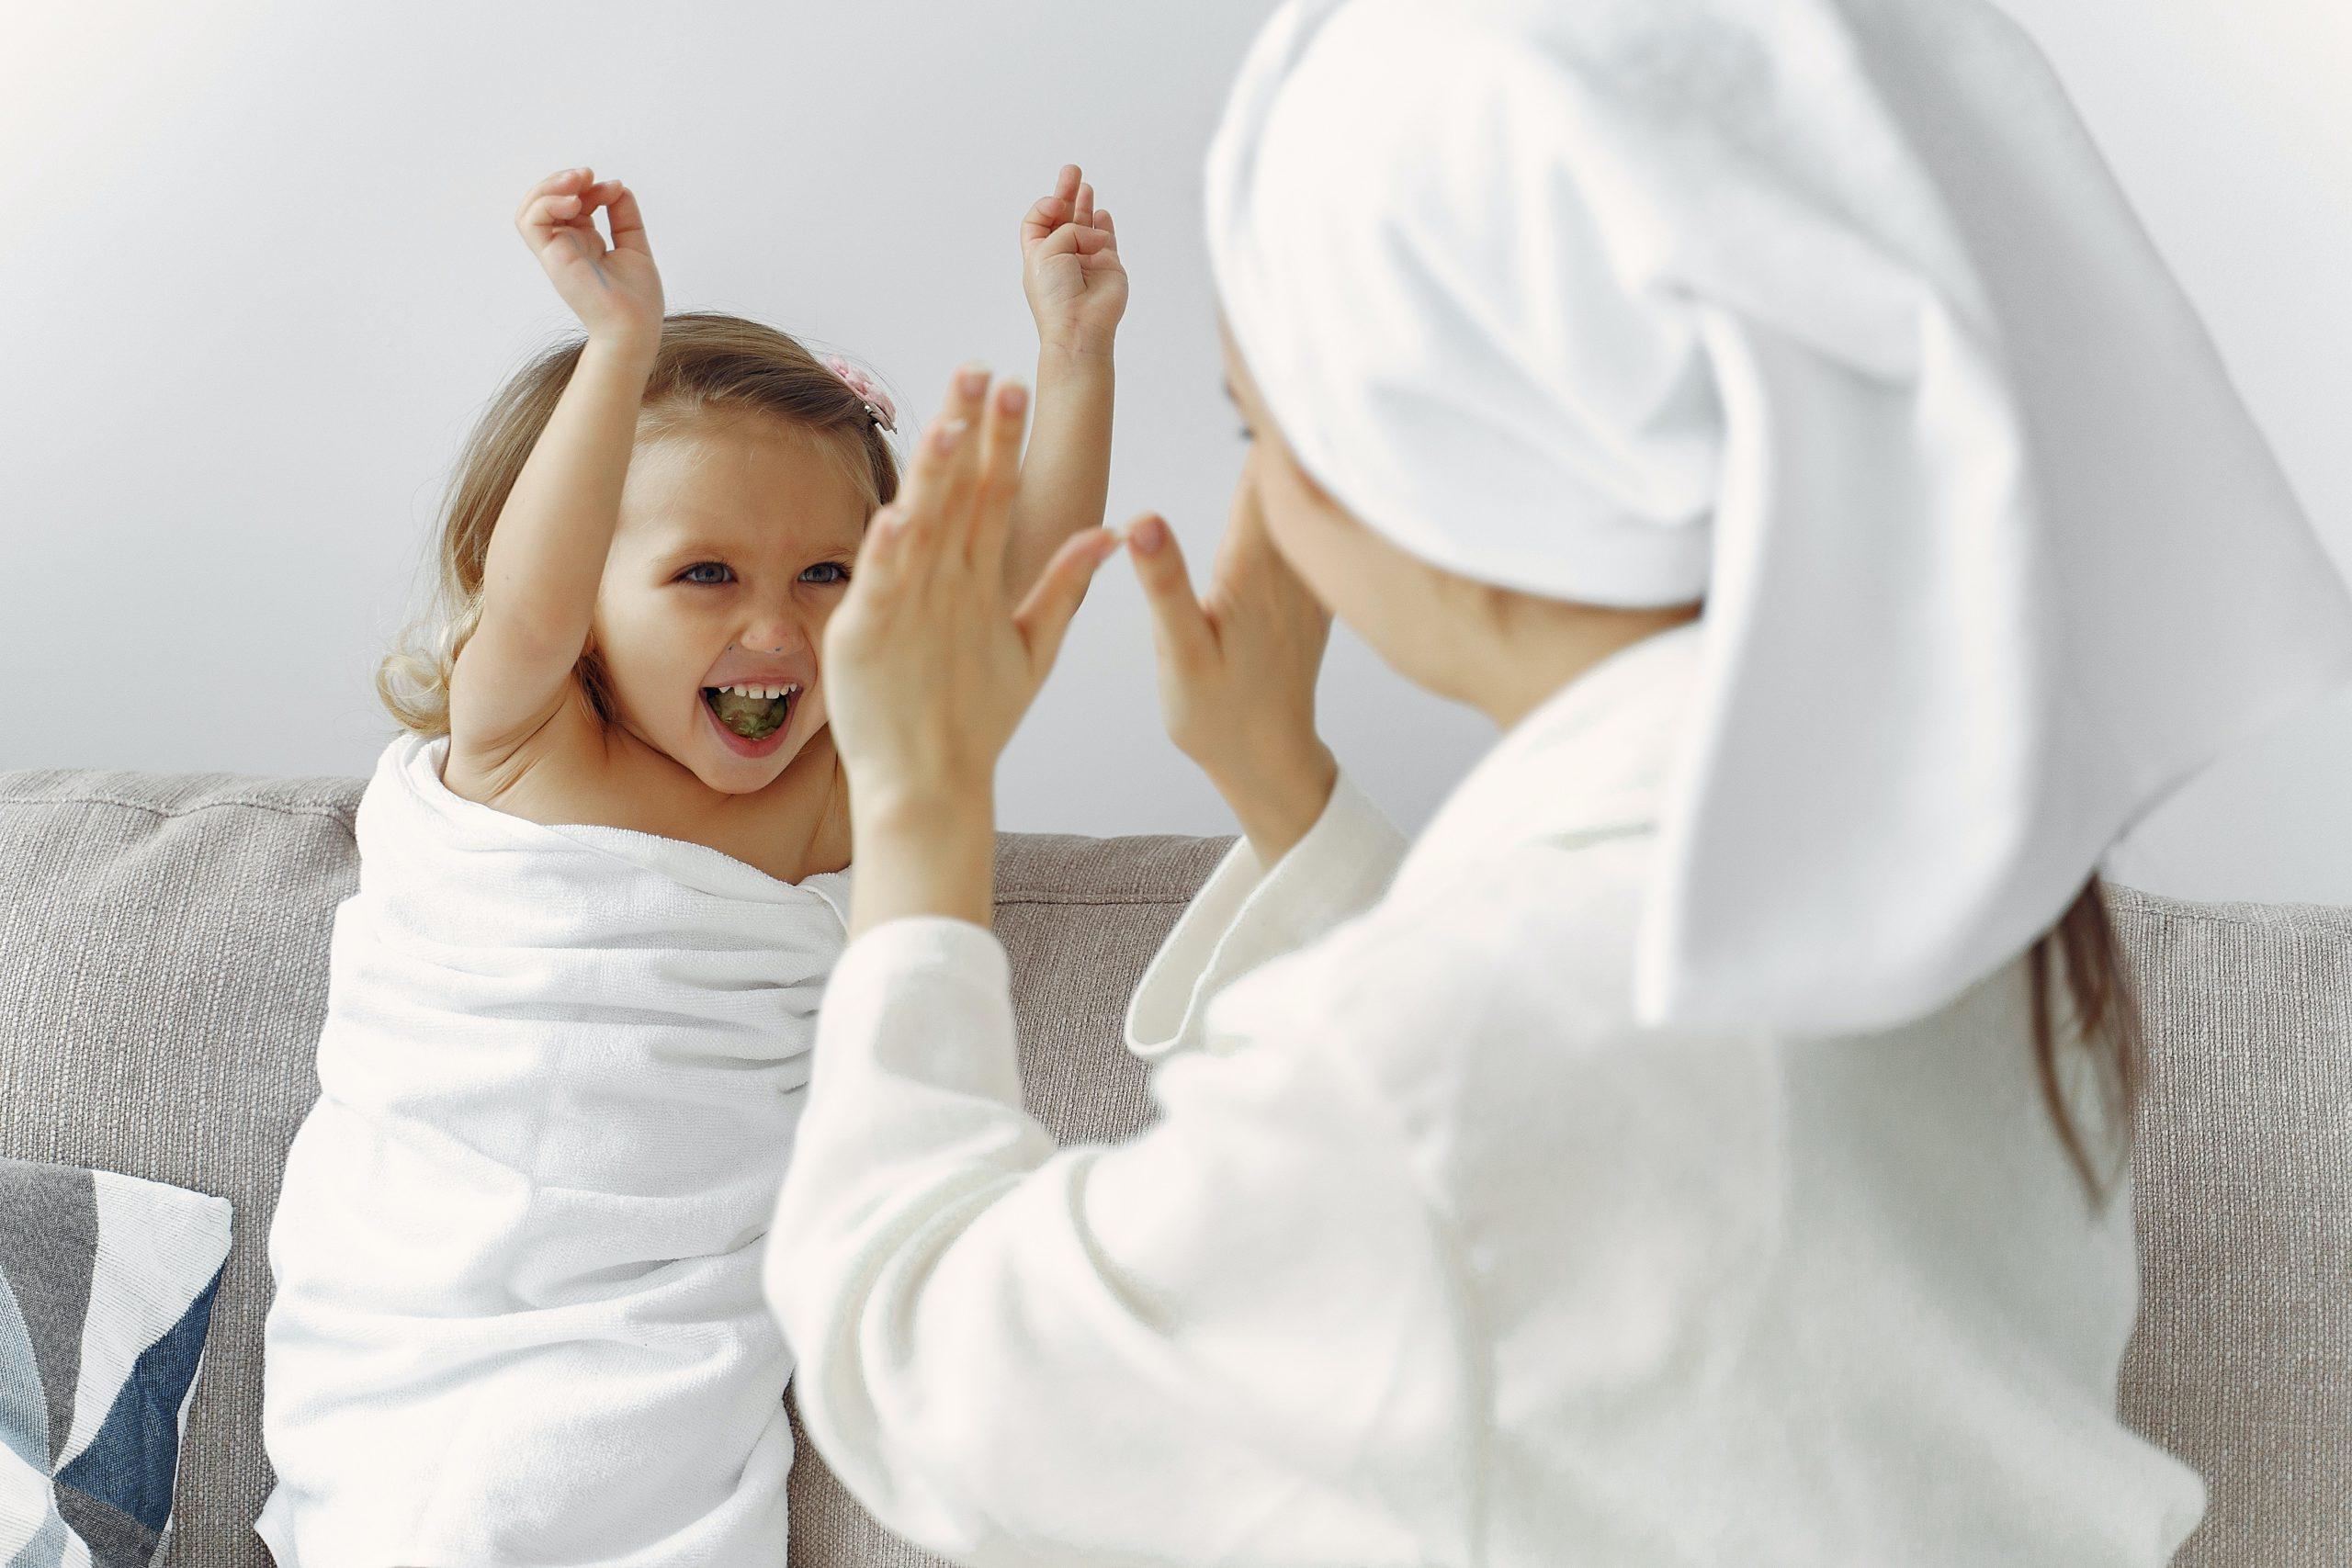 The Complete Guide to Body Care & Personal Hygiene for Kids